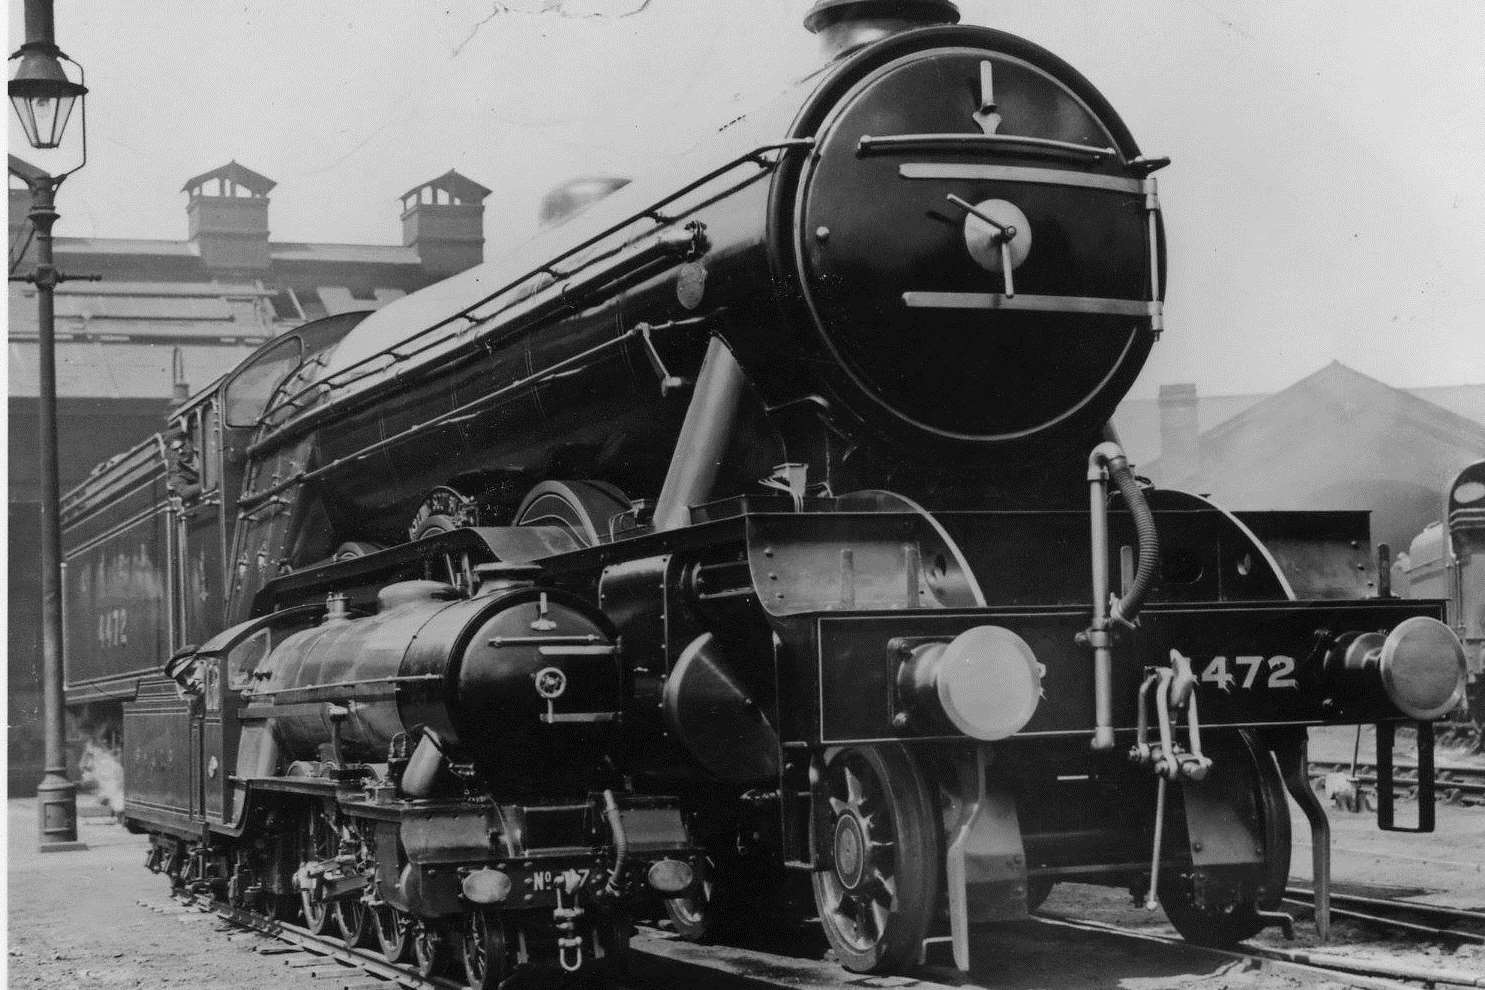 Typhoon and Flying Scotsman side by side 90 years ago at King's Cross in London